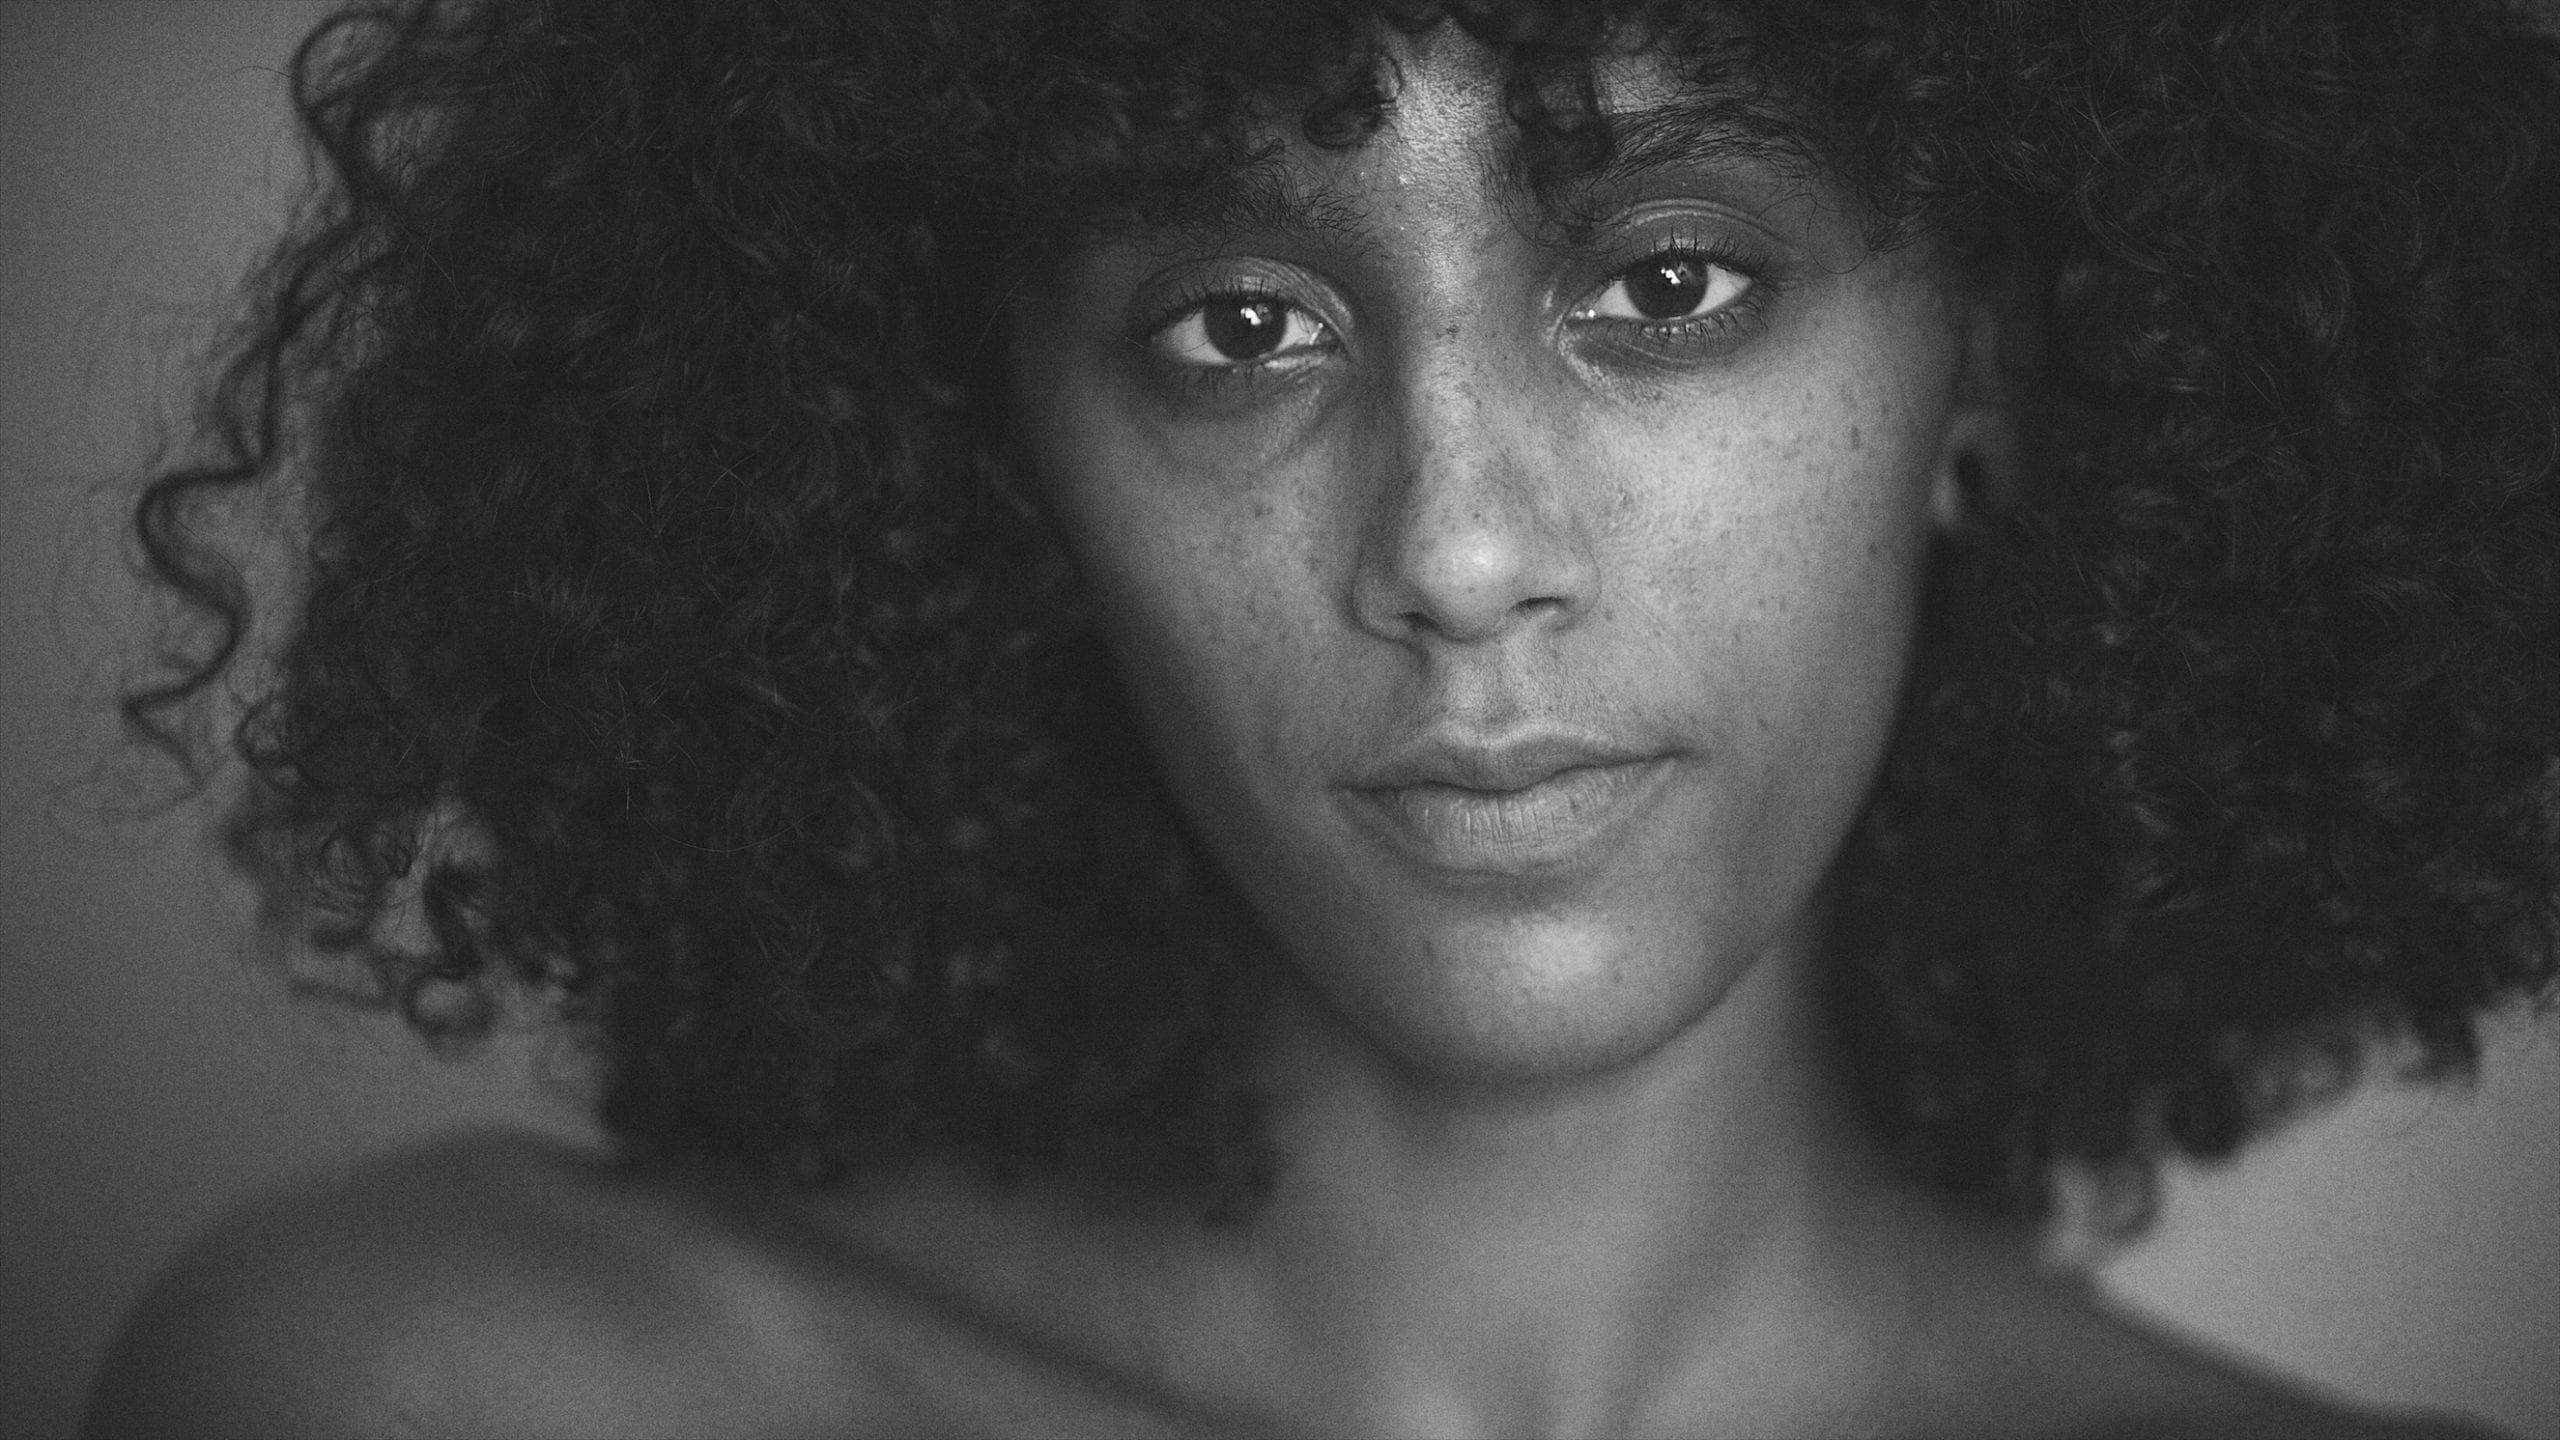 We knew South Florida Model, Jasmine, would be a great fit for this role. Just look at those eyes! Black and white